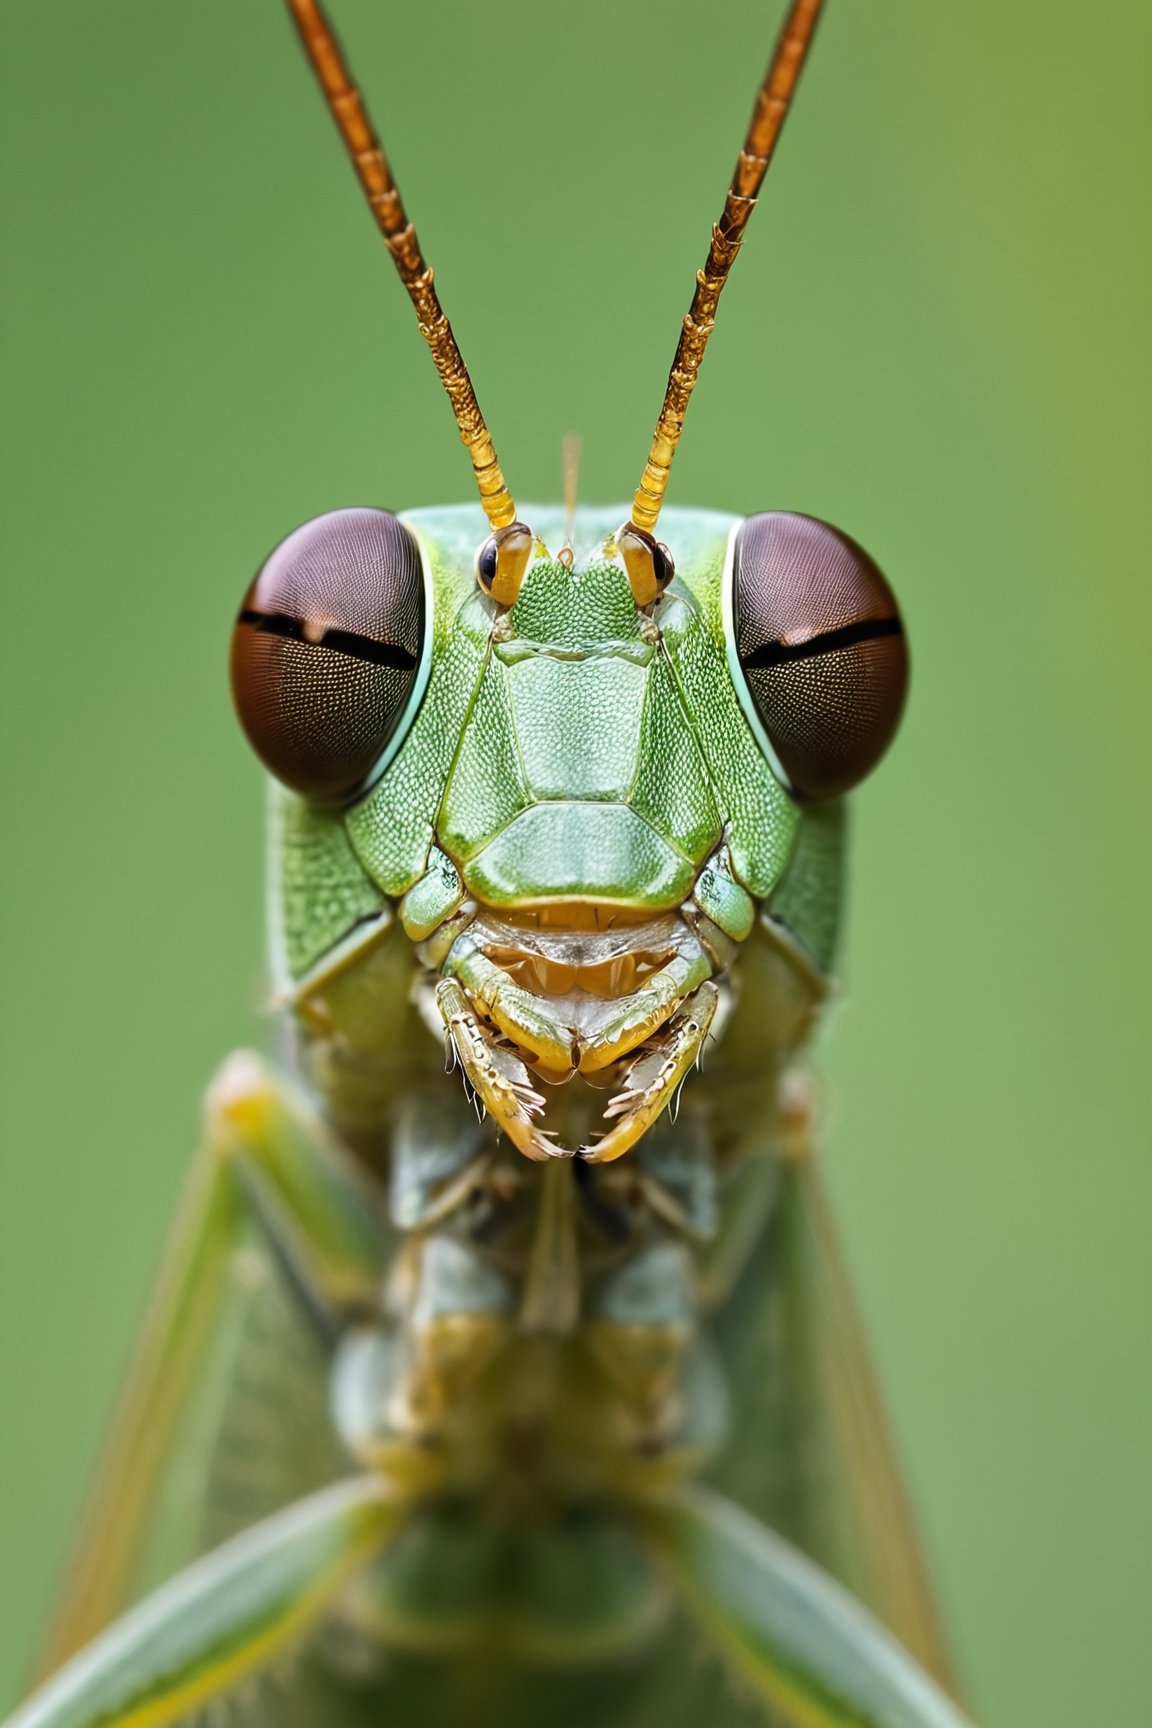 Marco photography of a grasshopper head,, everything sharp in focus, highly detailed